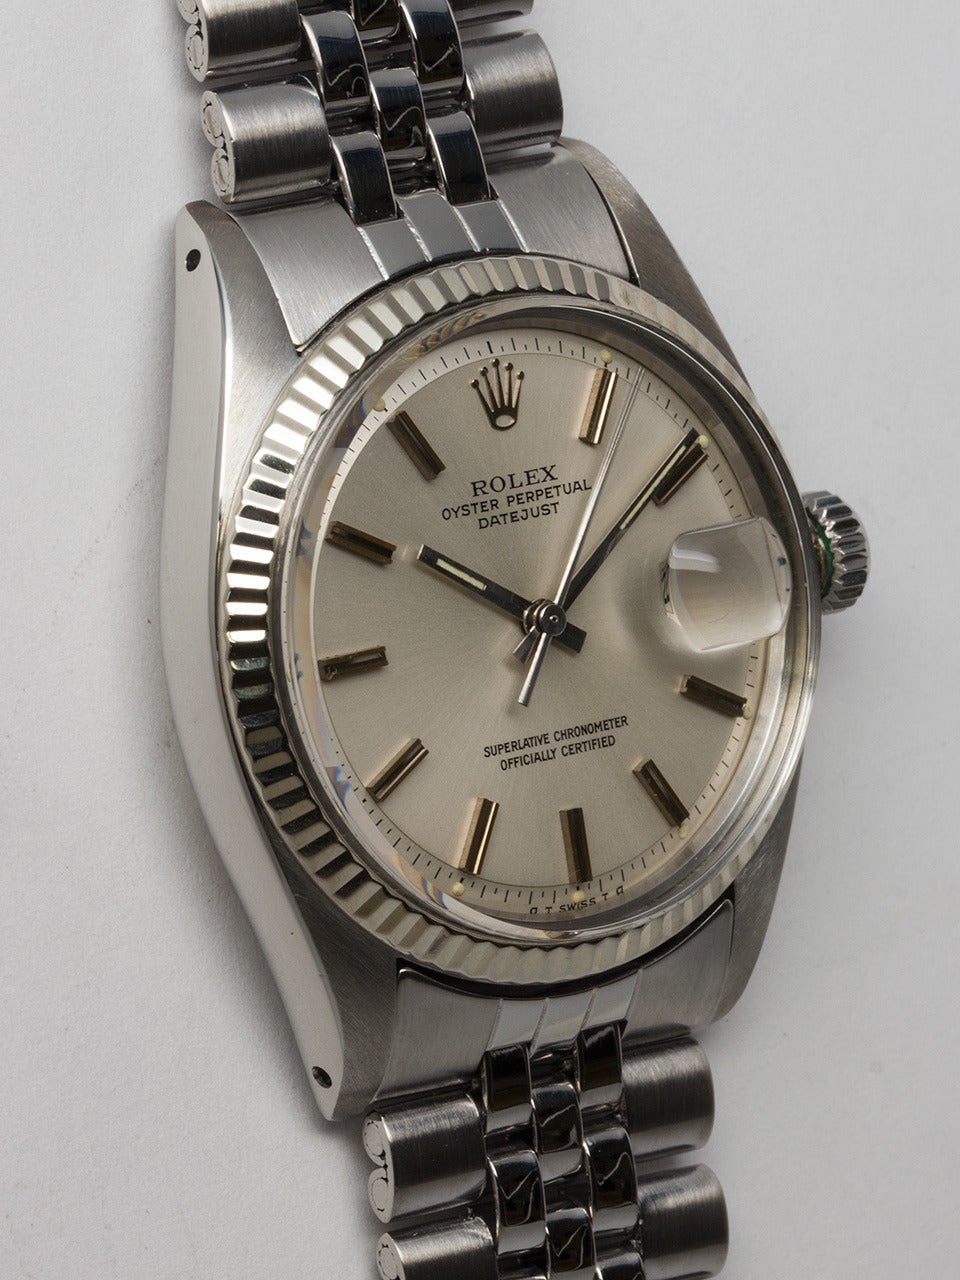 Rolex Stainless Steel Datejust Wristwatch ref 1601 serial# 2.3 million circa 1972. 36mm diameter case with fluted bezel and acrylic crystal. Original silvered satin dial with distinctive silver applied markers and hands. Powered by caliber 1570 self